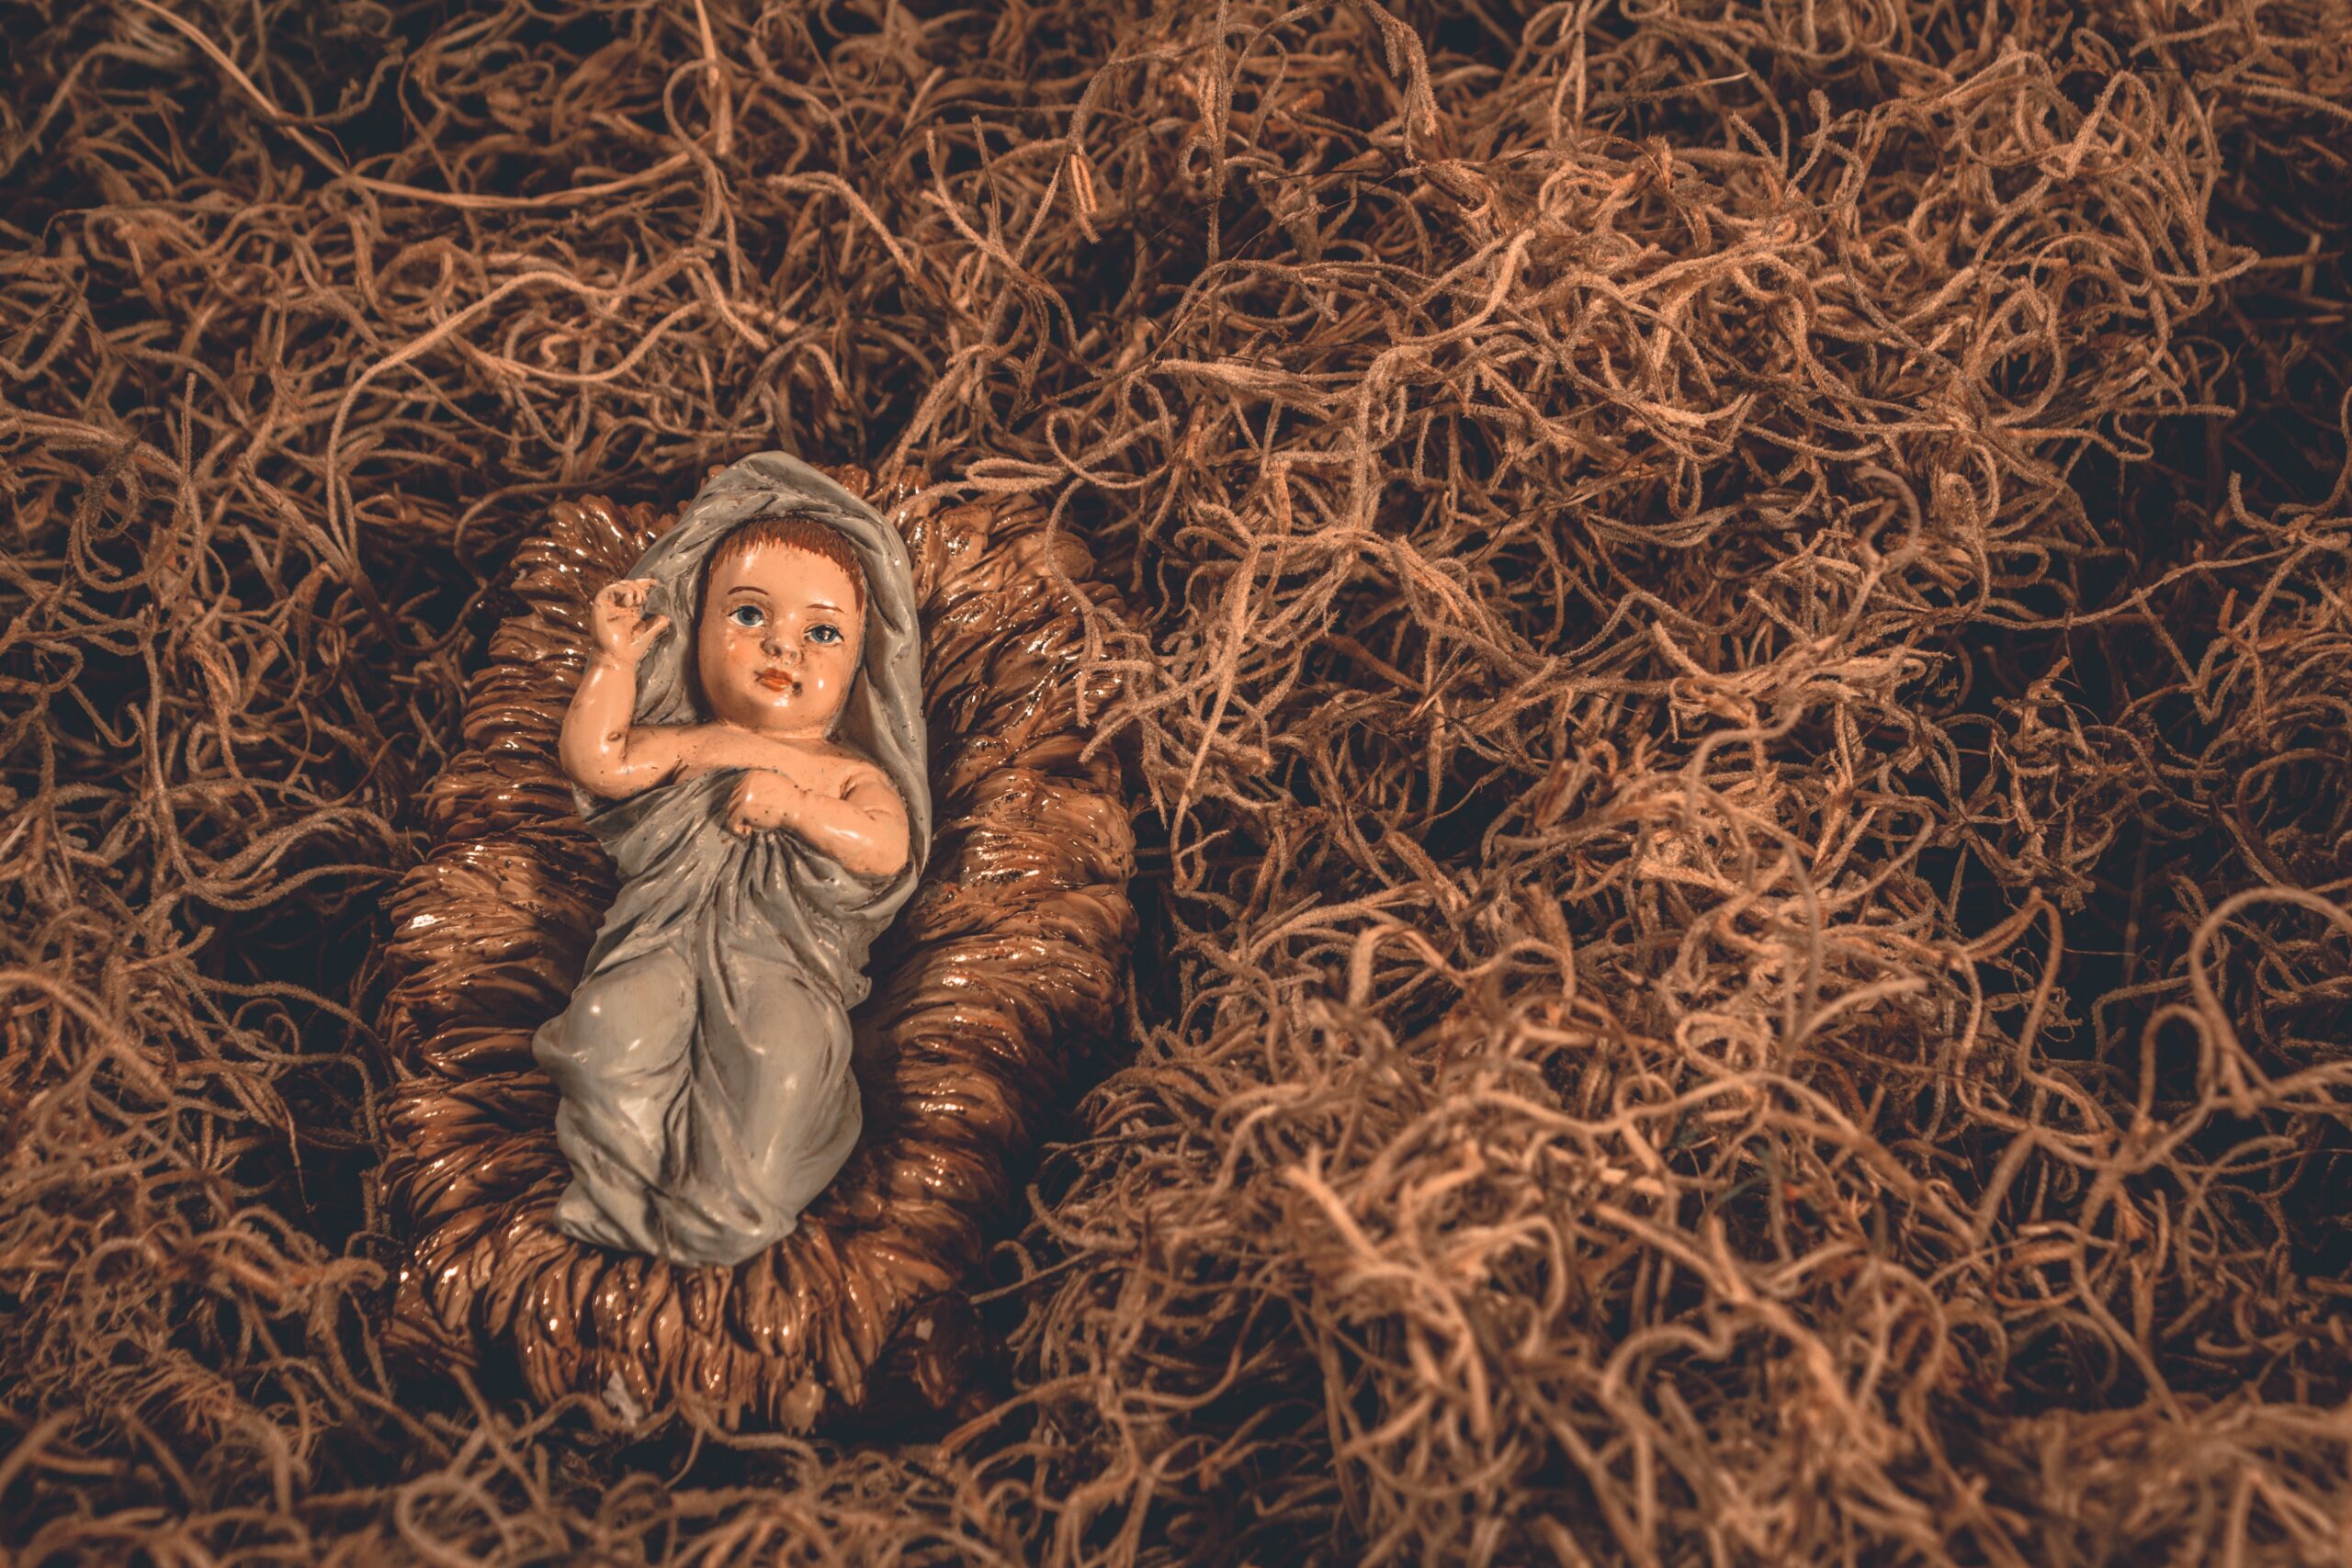 Baby Jesus figurine from a nativity set laying in straw